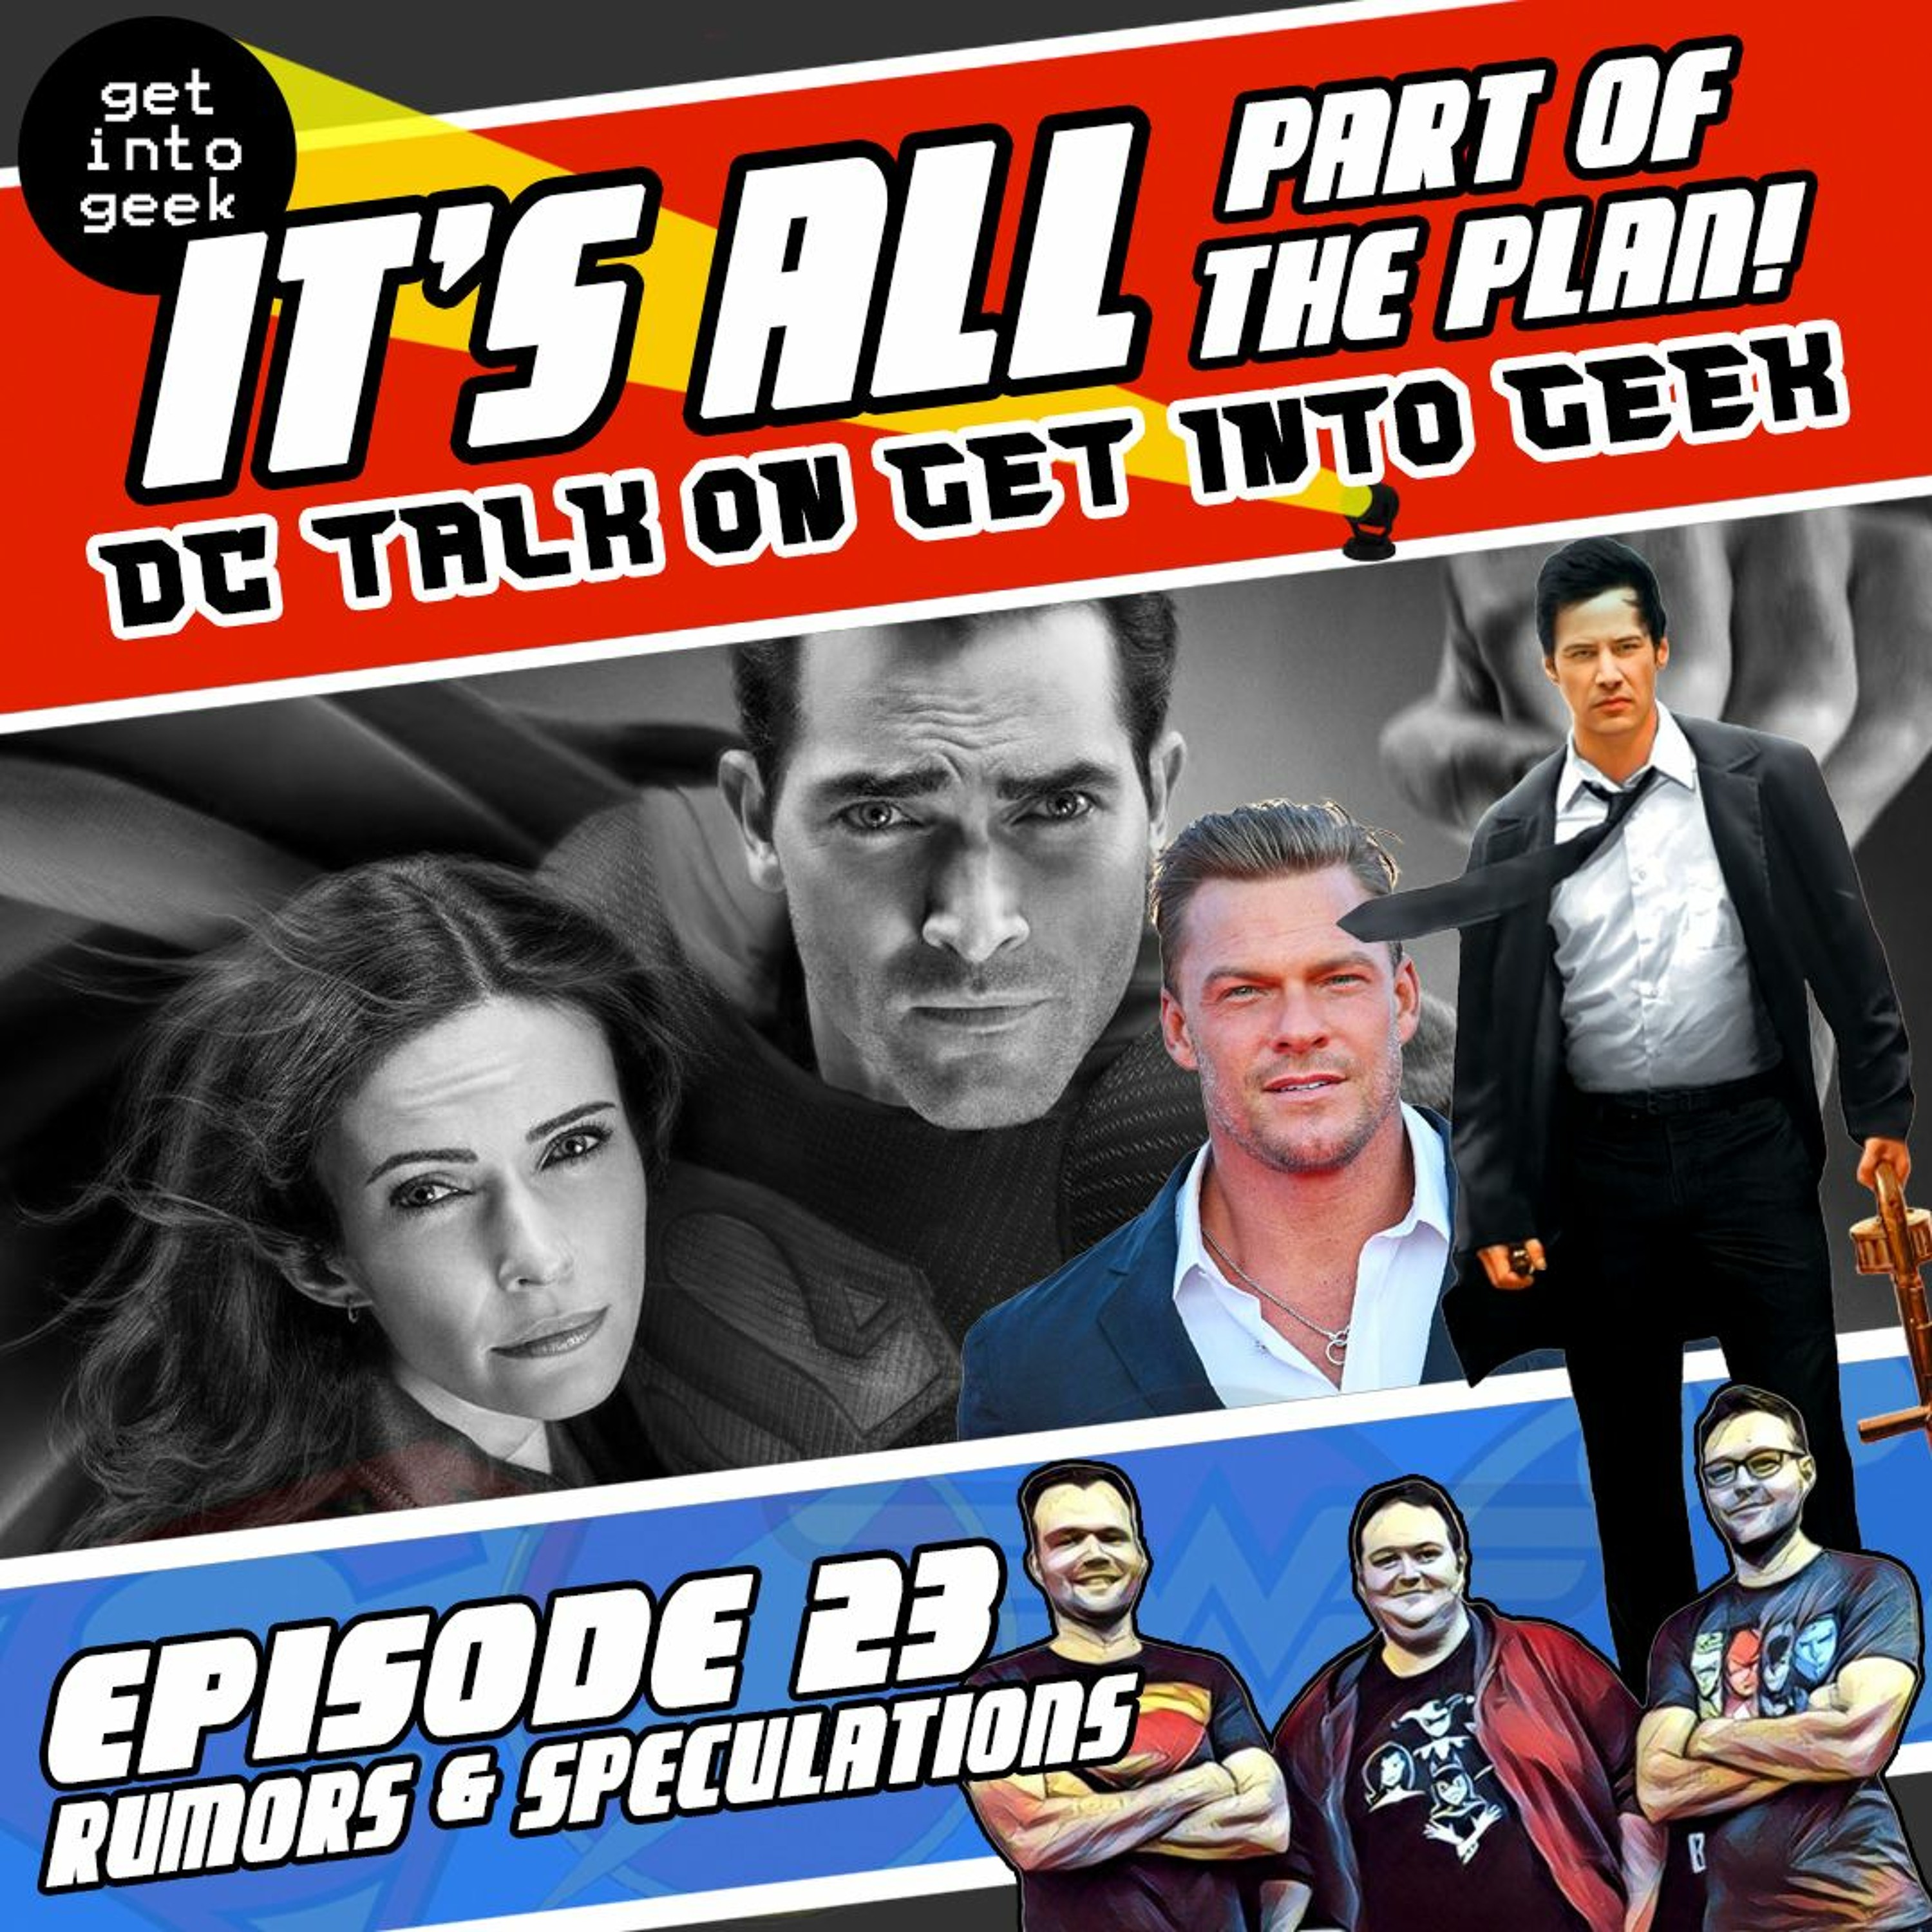 Rumors & Speculations (It’s All Part Of The Plan - DC Talk Episode 1.23)